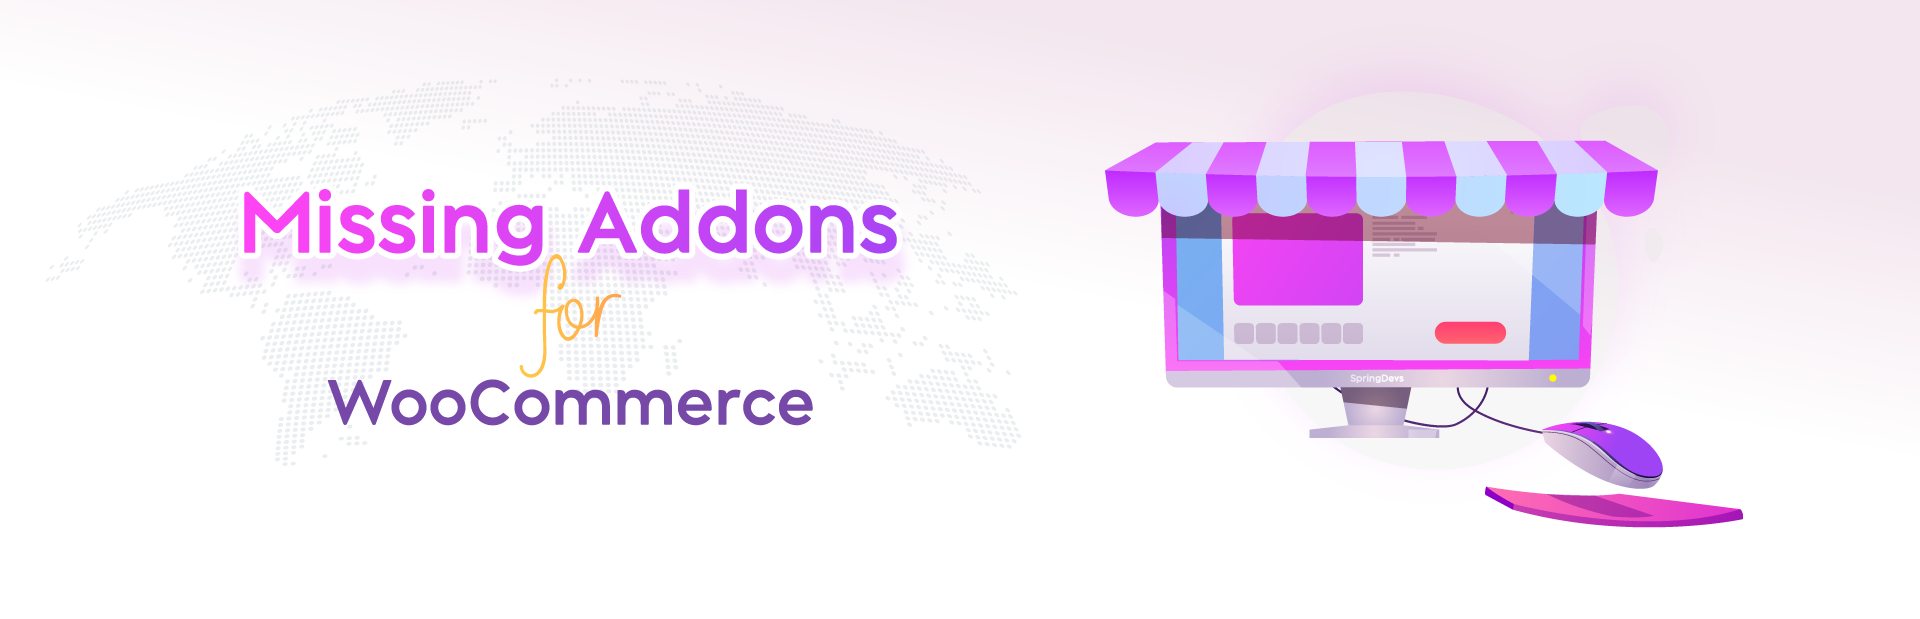 Missing Addons For WooCommerce Preview Wordpress Plugin - Rating, Reviews, Demo & Download